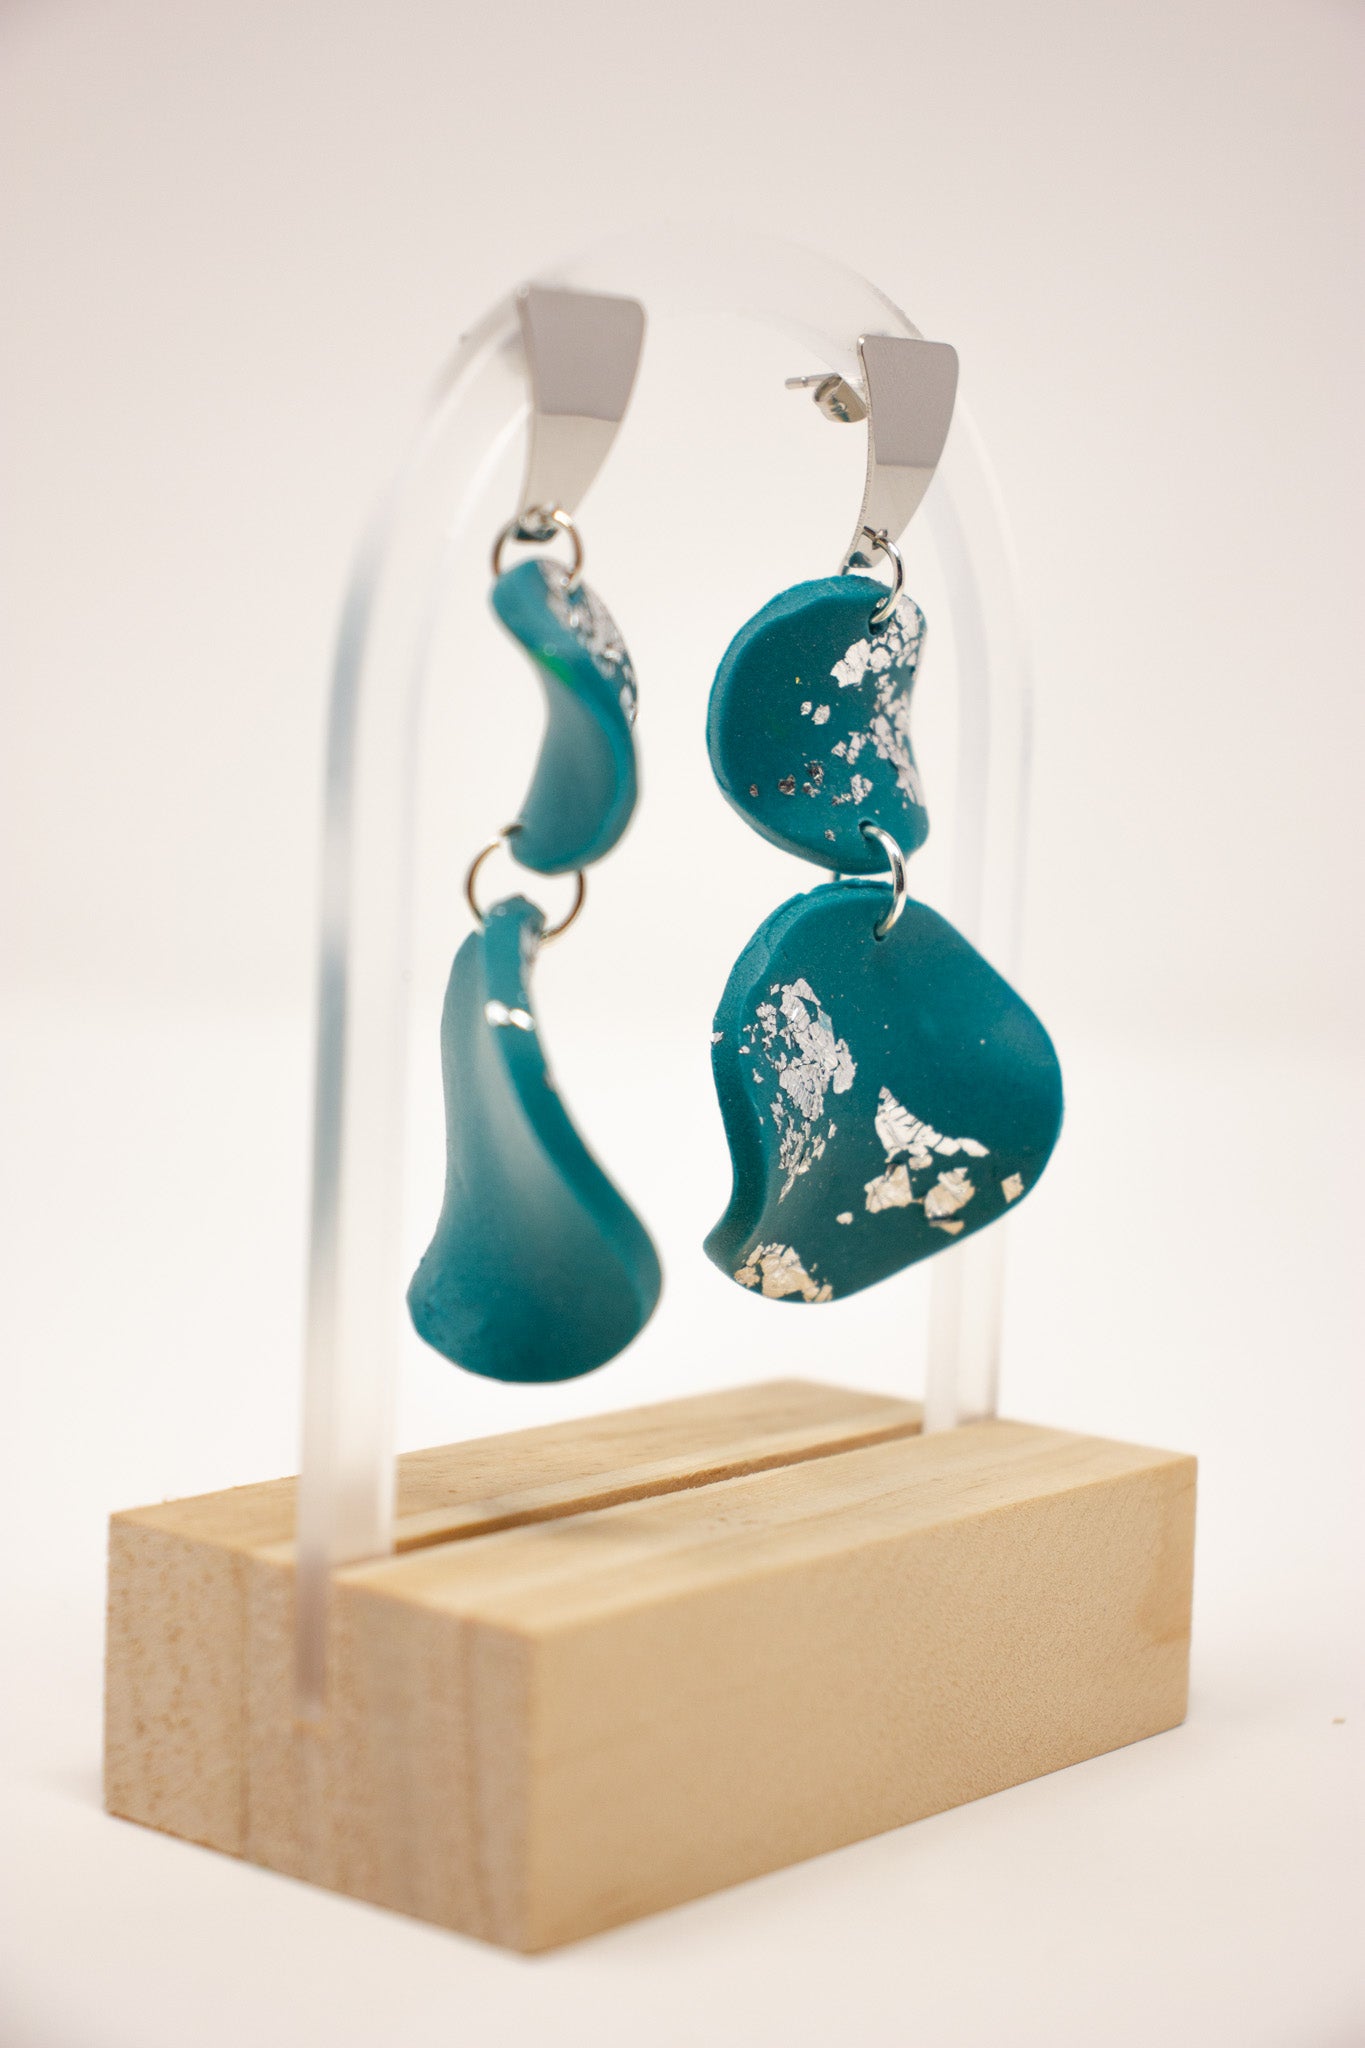 Ondes - Sea Glass with Silver Leaf